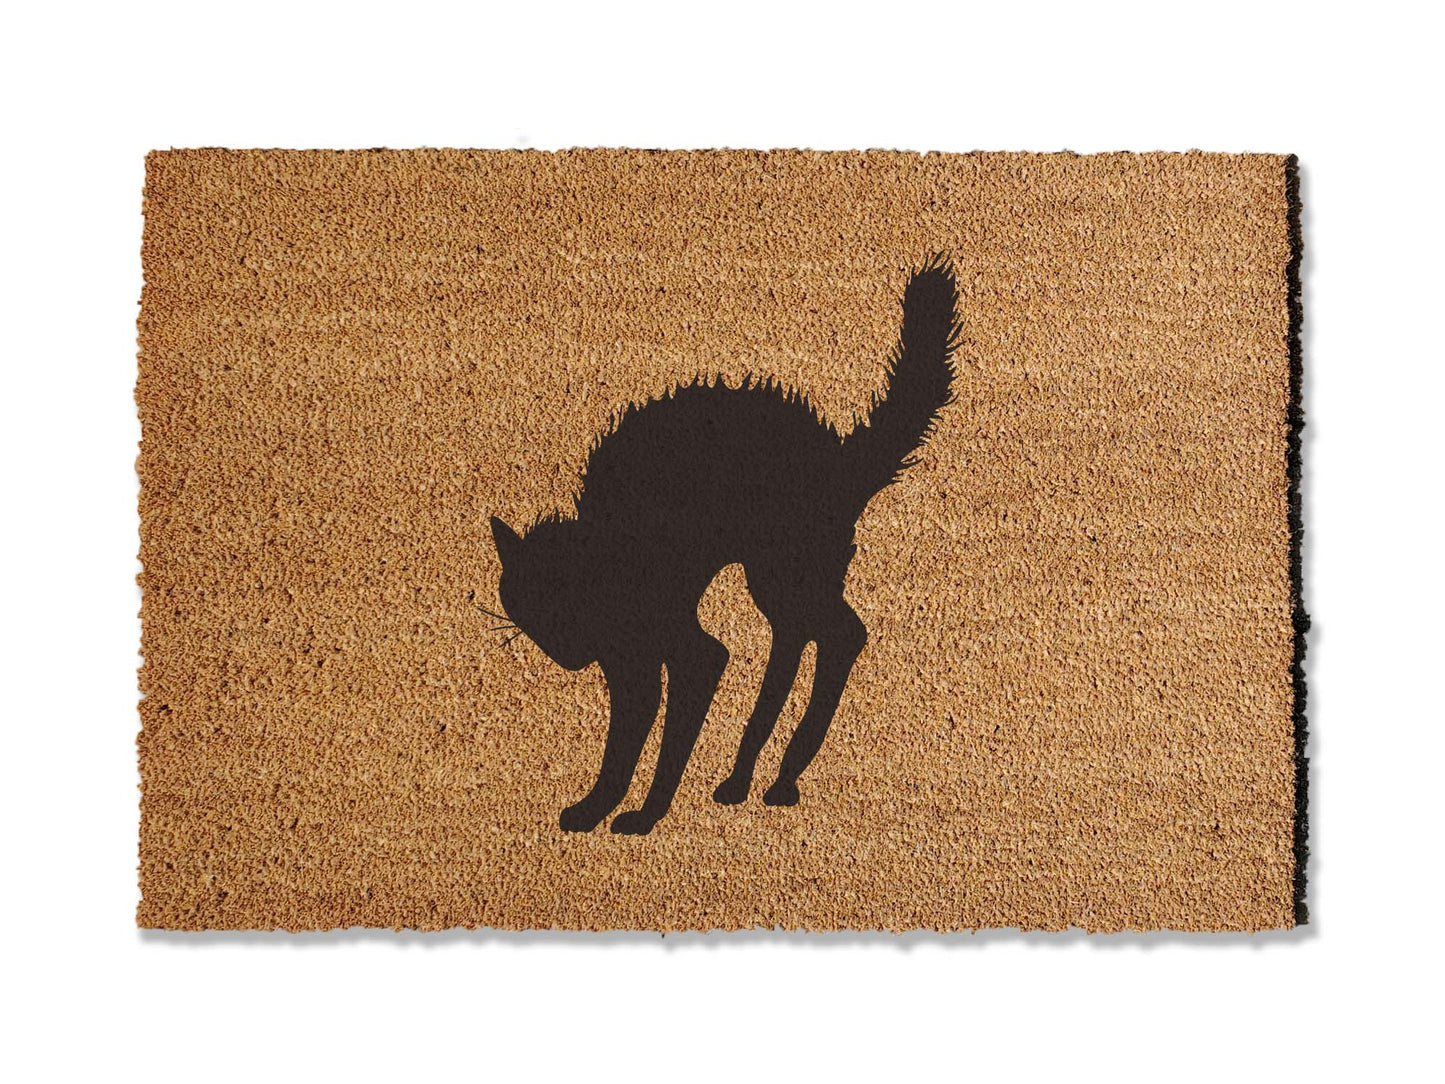 Halloween-themed 1/2 inch thick coir doormat with a scared black cat design. Perfect for adding a touch of spookiness to your entryway. This decorative mat is also highly effective at trapping dirt, combining style and functionality for a festive entrance.